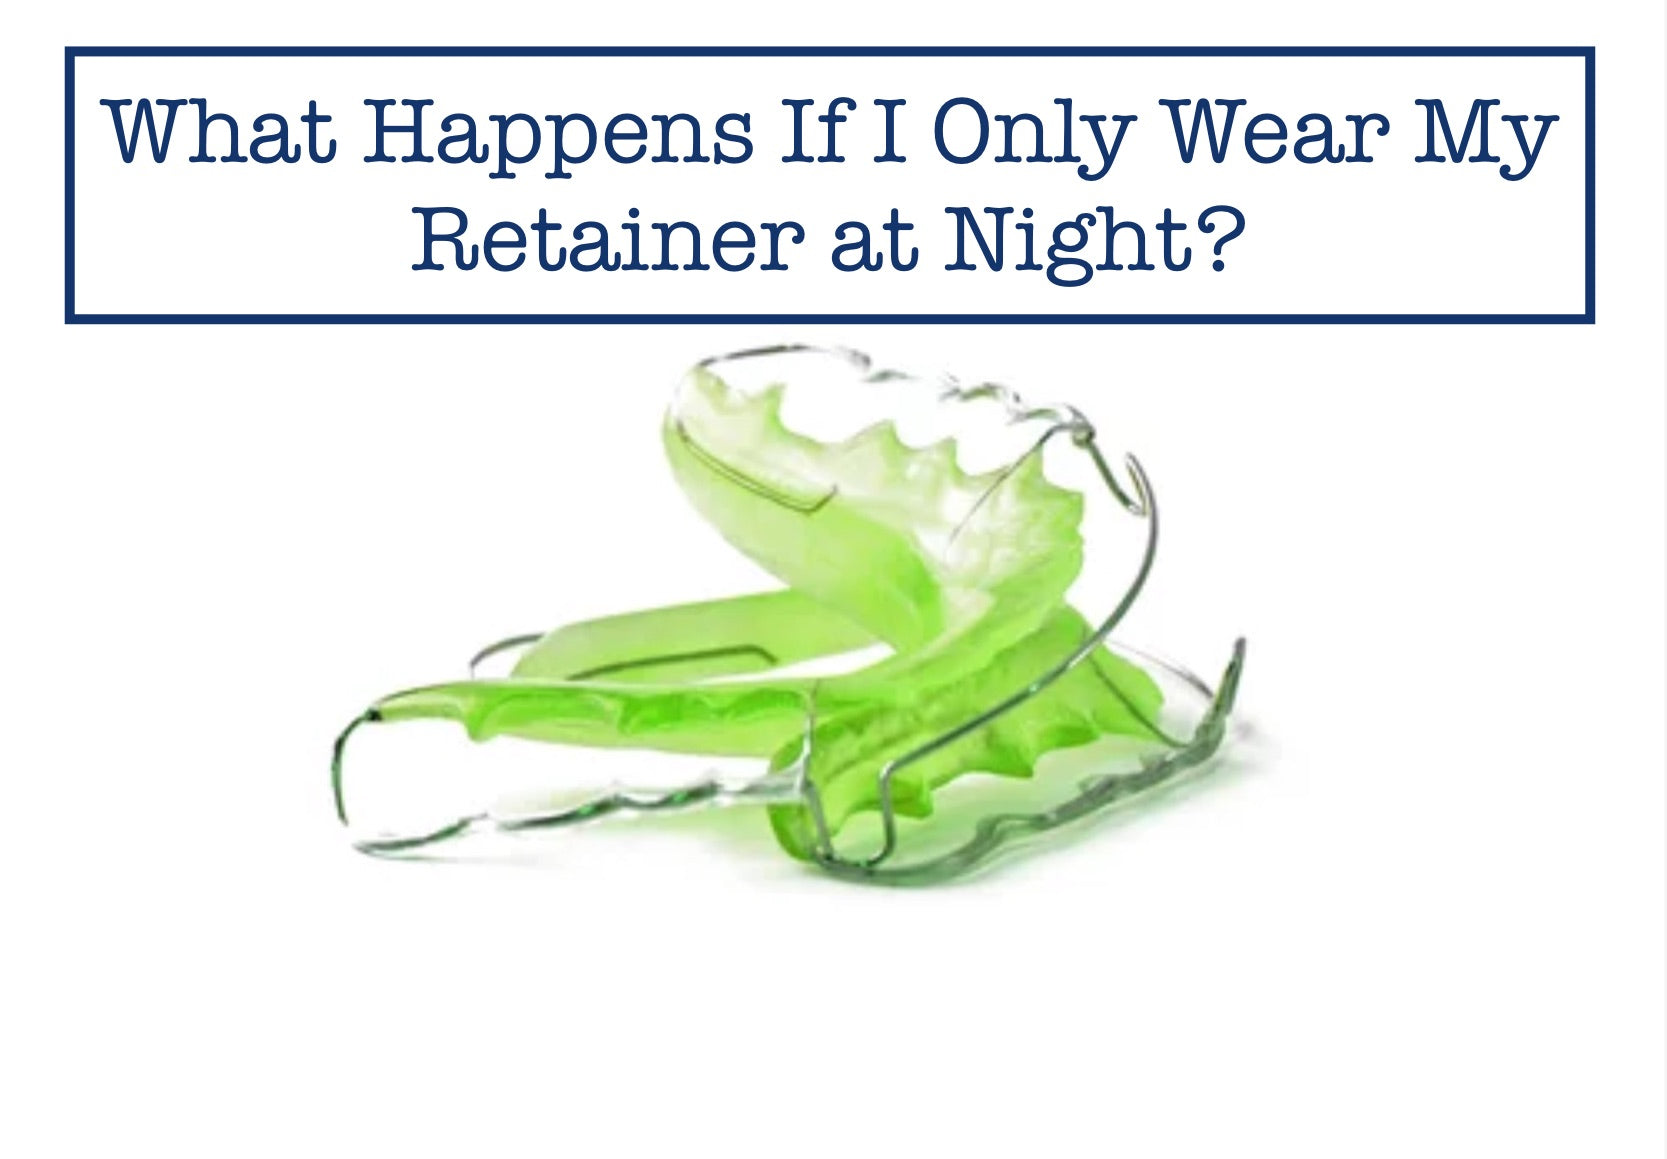 What Happens If I Only Wear My Retainer at Night?